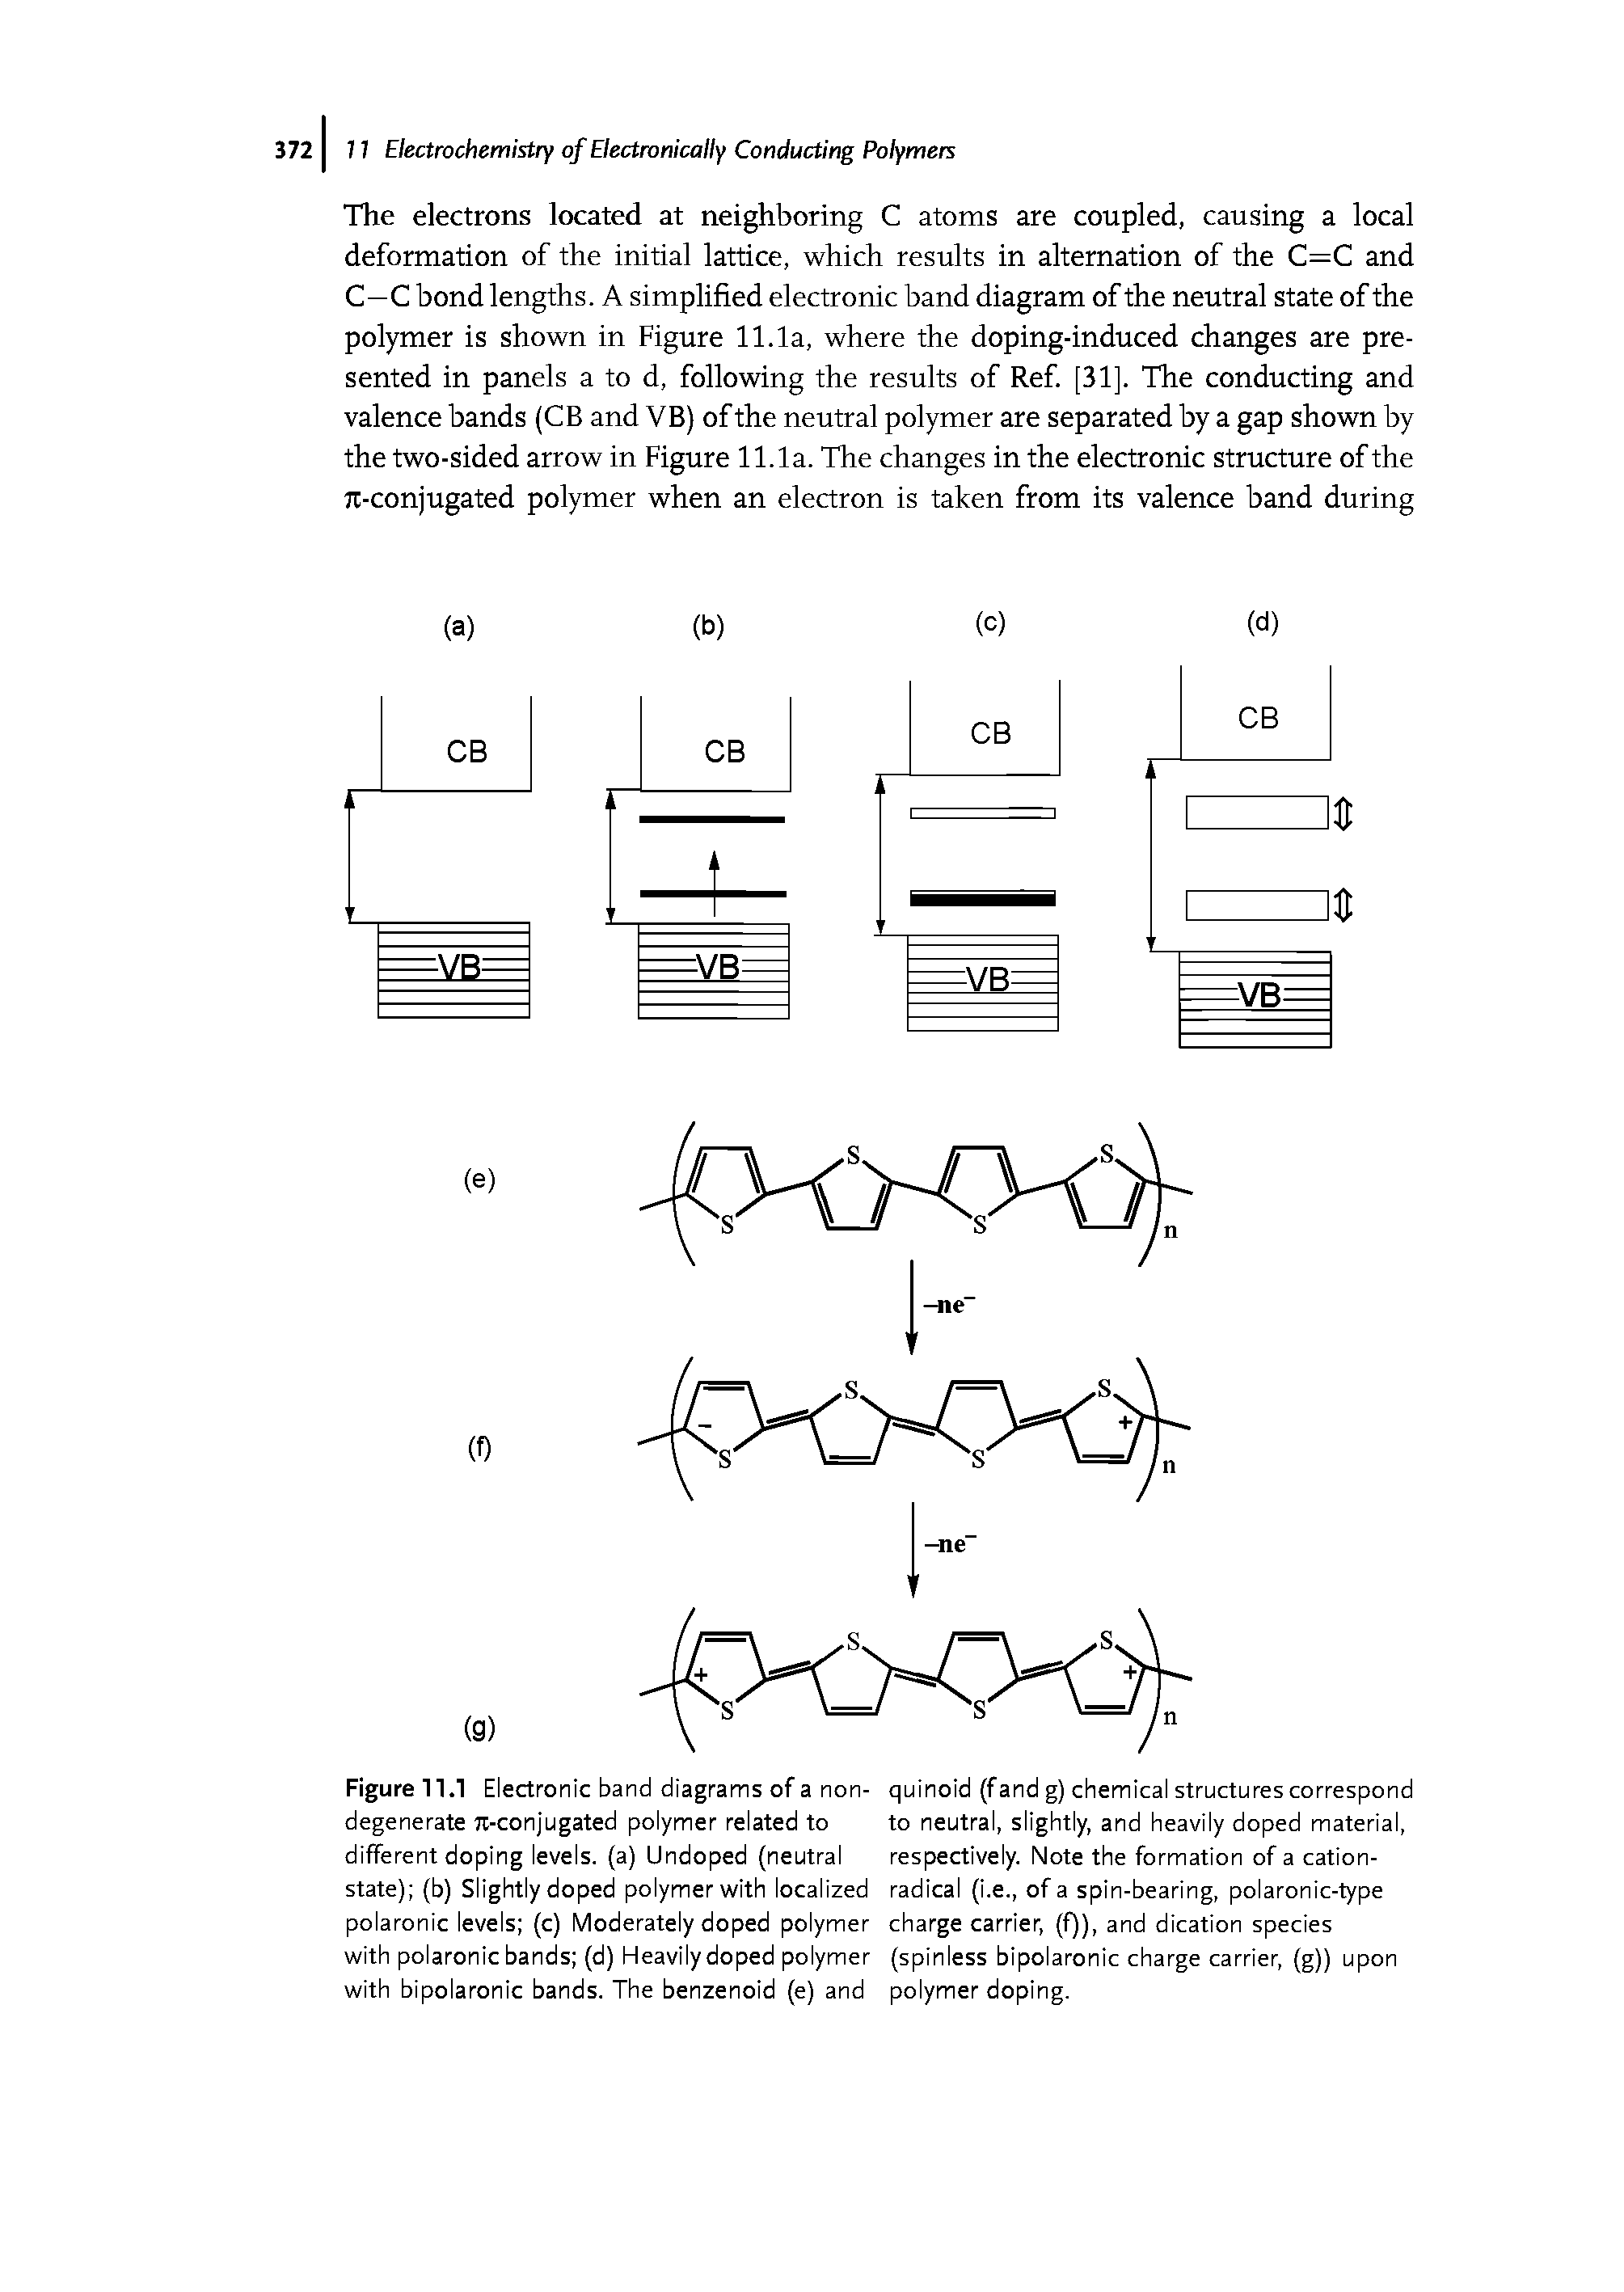 Figure 11.1 Electronic band diagrams of a nondegenerate Jt-conjugated polymer related to different doping levels, (a) Undoped (neutral state) (b) Slightly doped polymer with localized polaronic levels (c) Moderately doped polymer with polaronic bands (d) Heavily doped polymer with bipolaronic bands. The benzenoid (e) and...